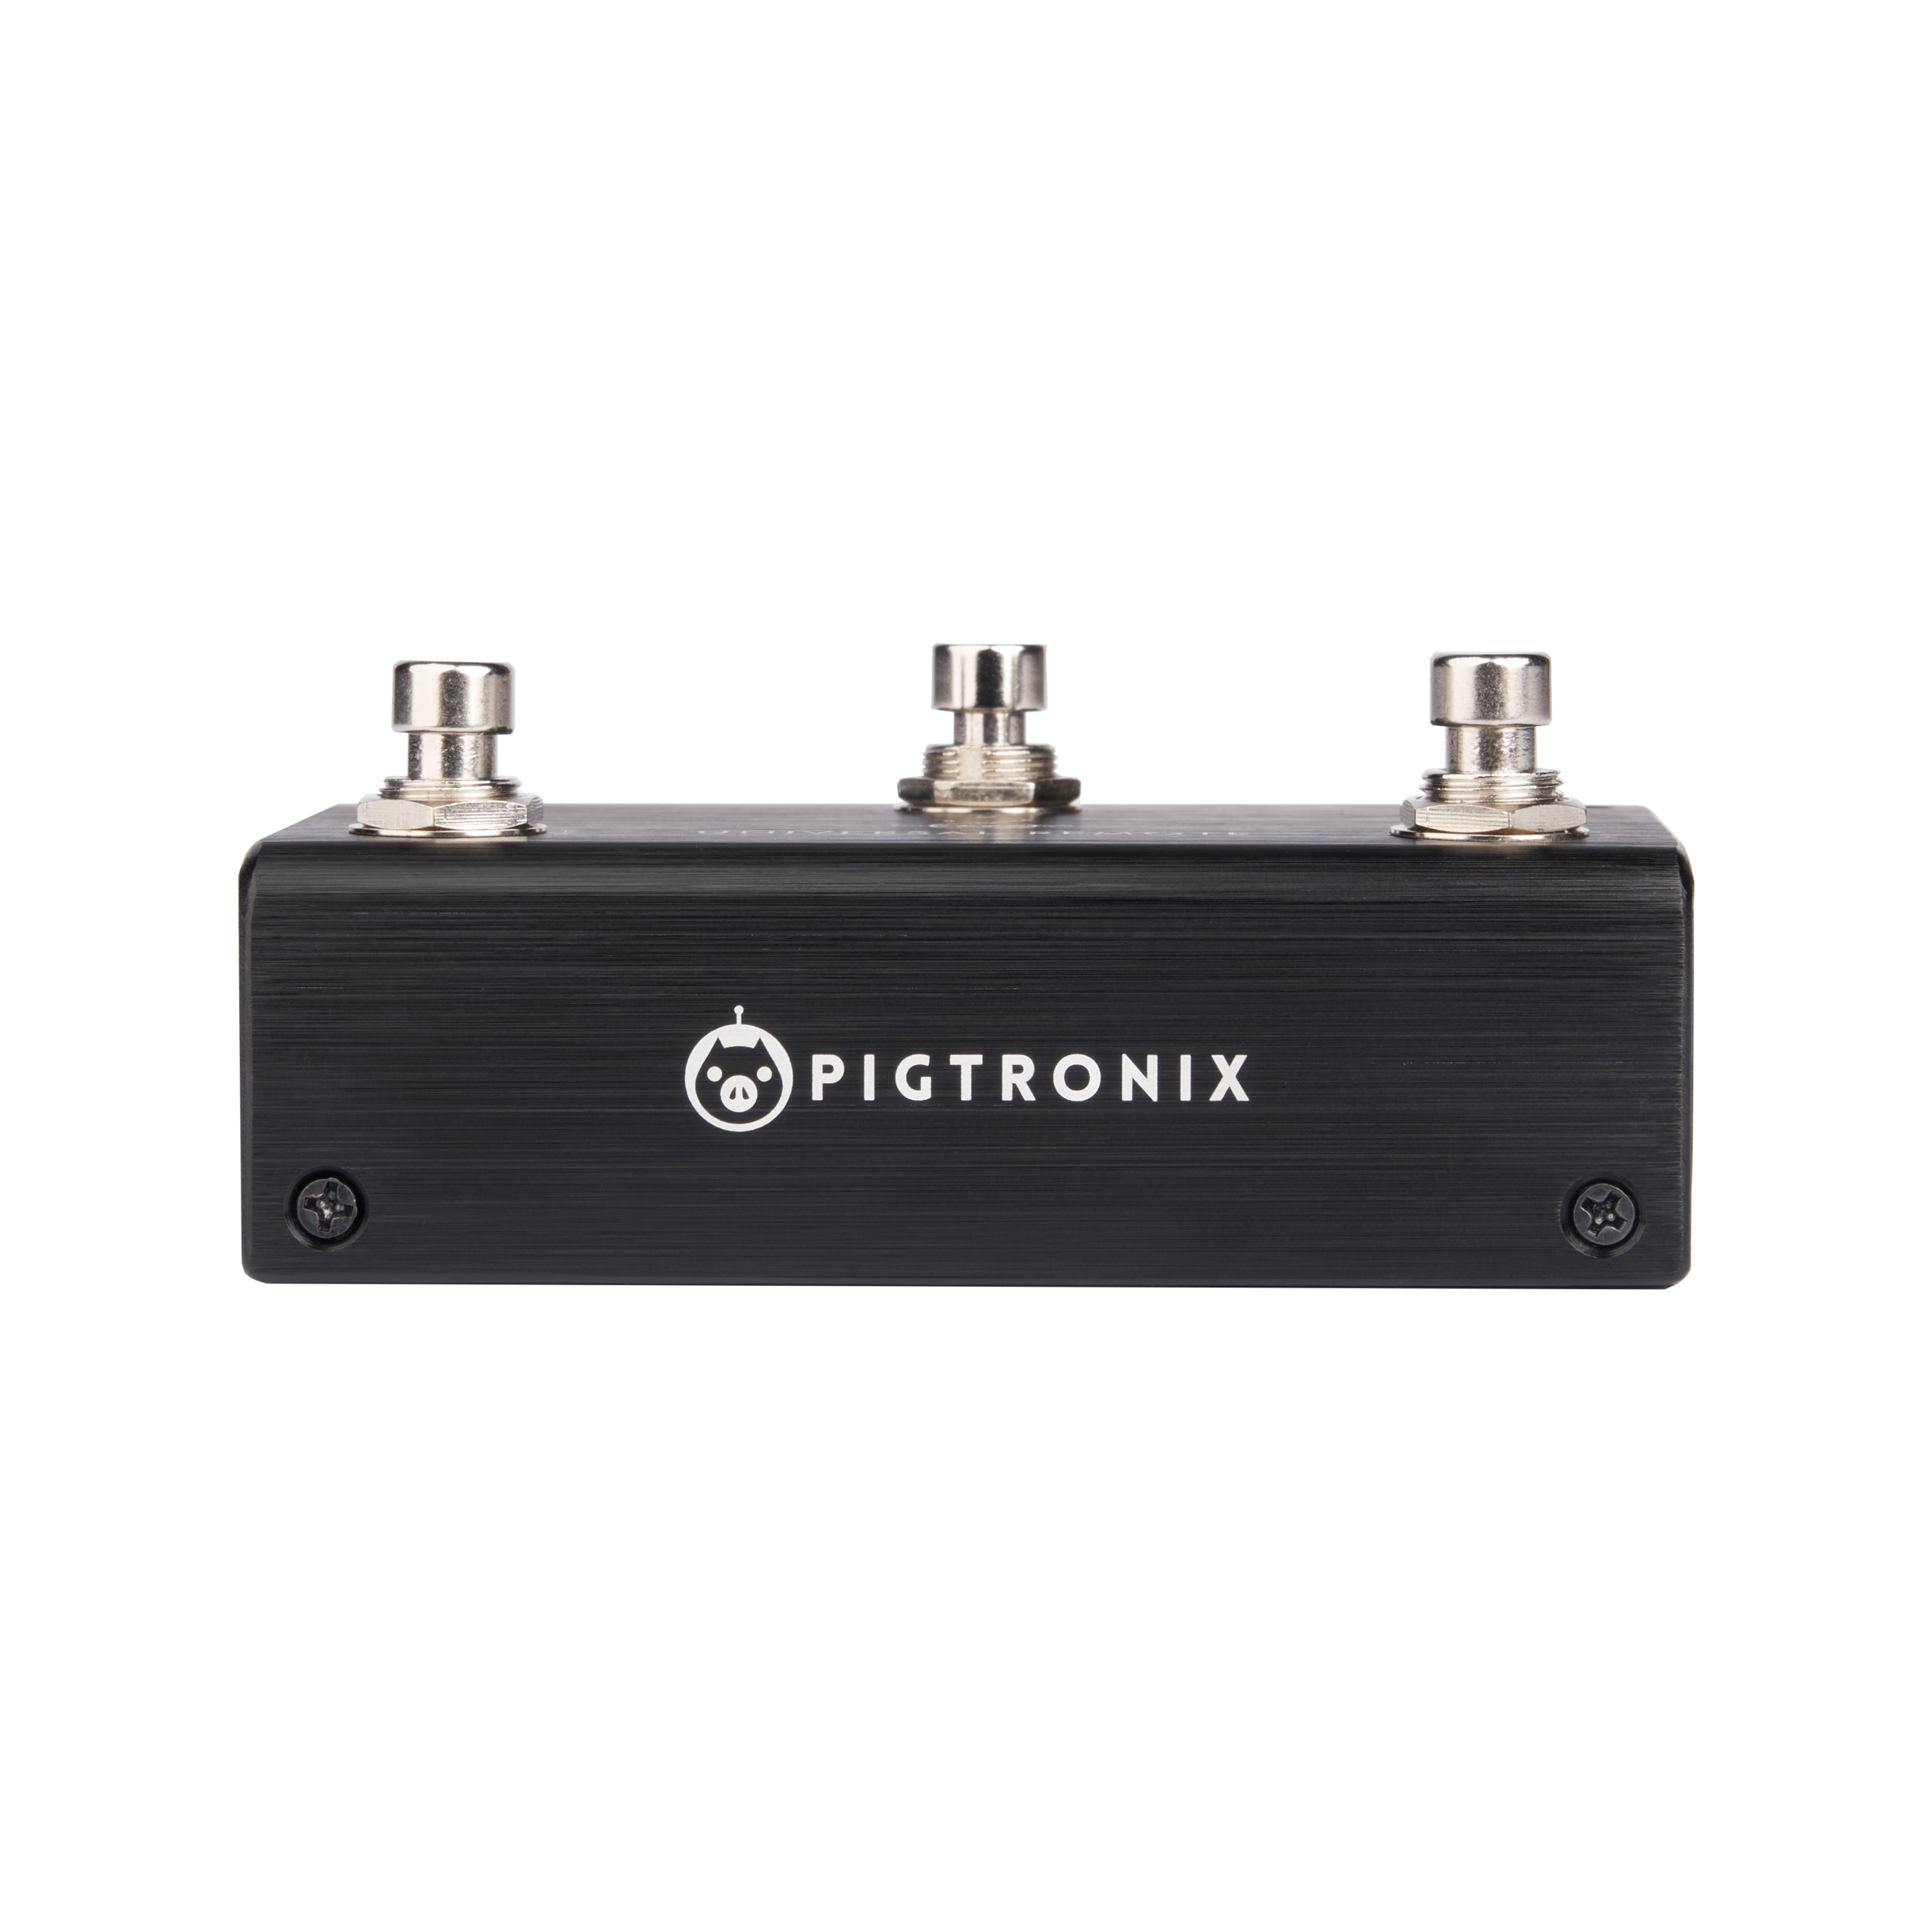 Universal Remote Switch - Pigtronix